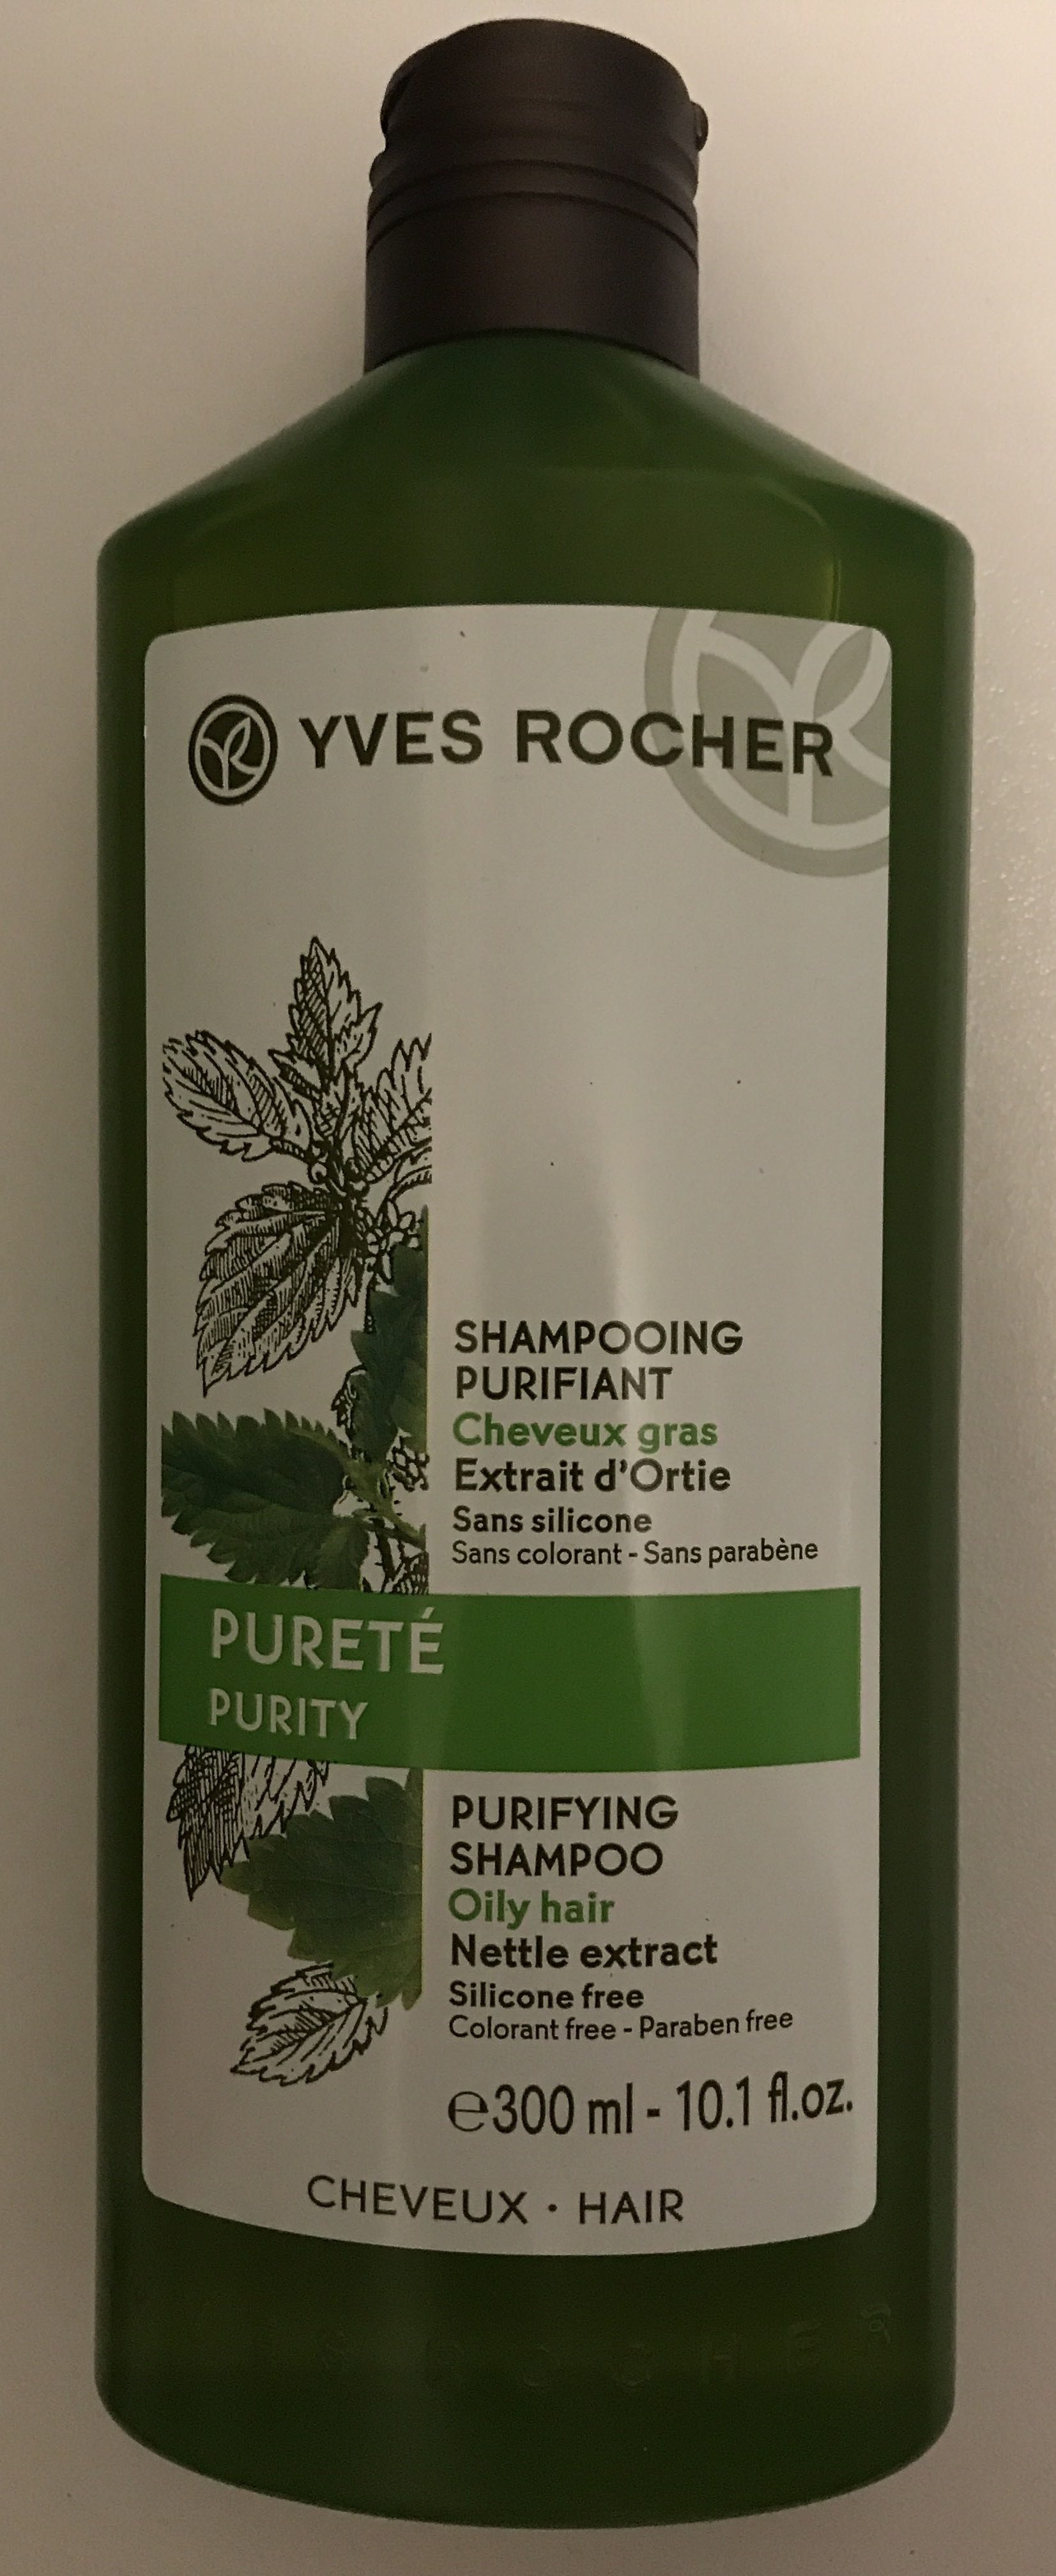 Shampooing purifiant - cheveux gras - Product - fr